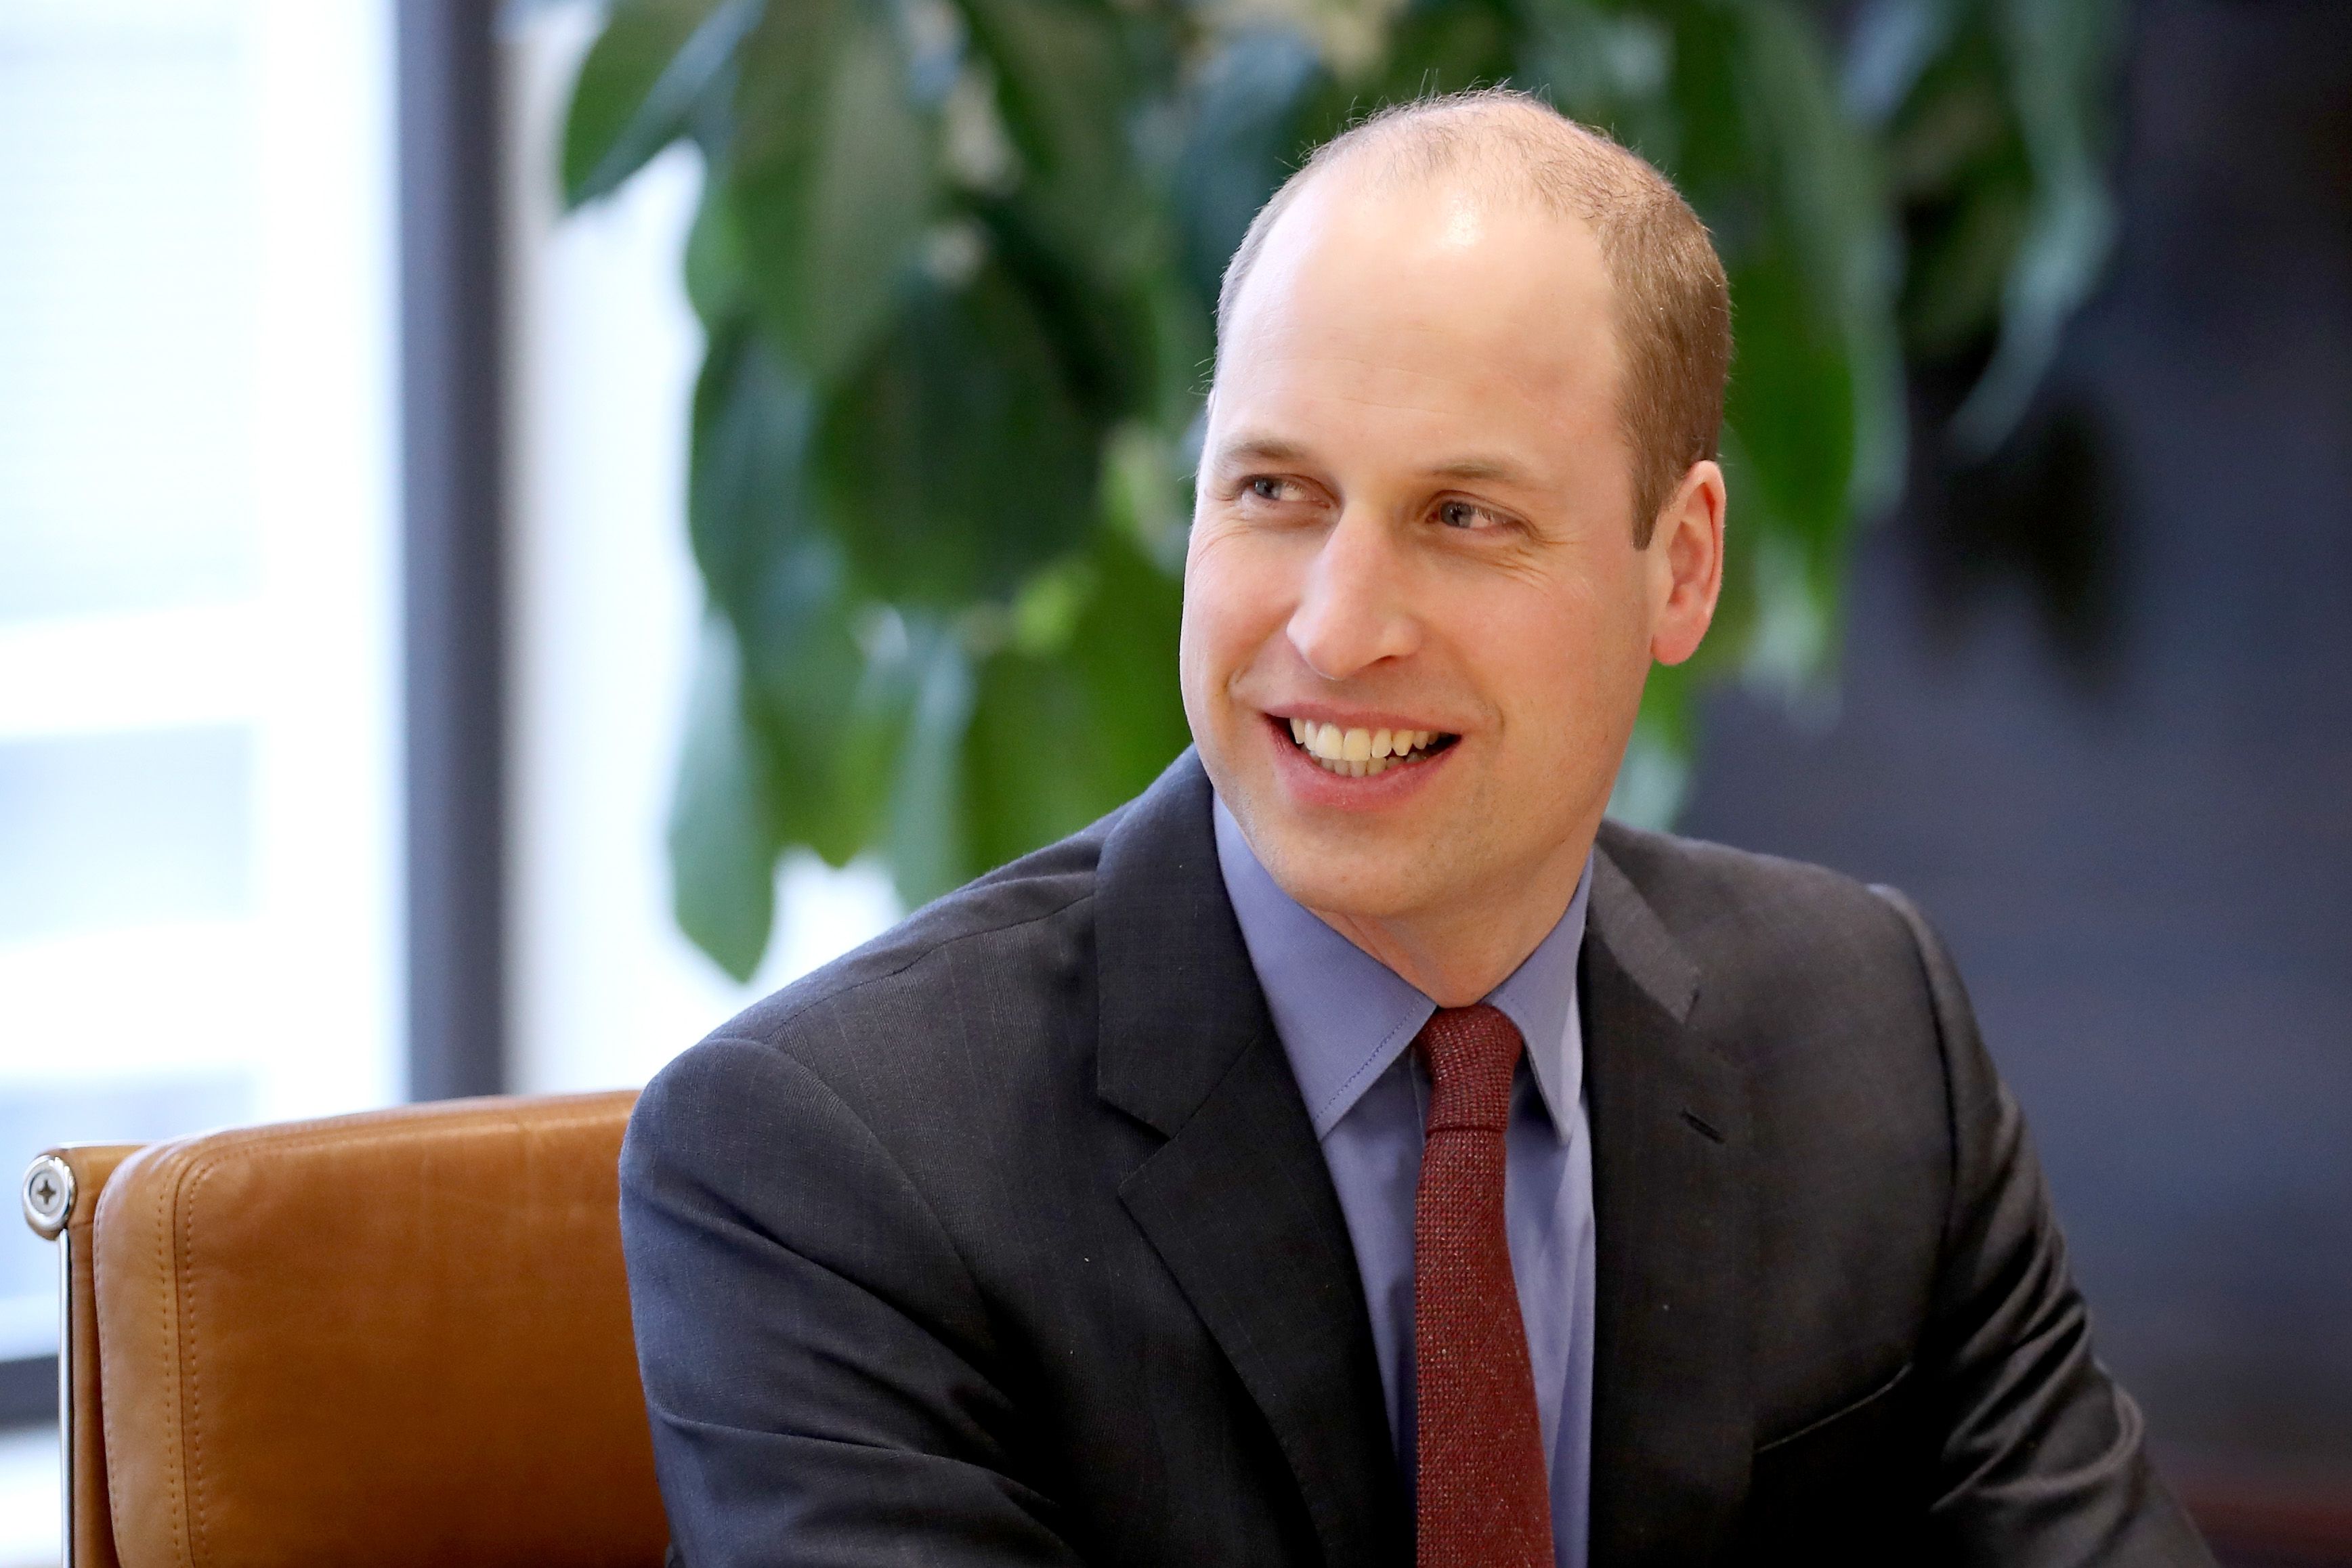 Prince William Net Worth - How William Earns His $40 Million Fortune